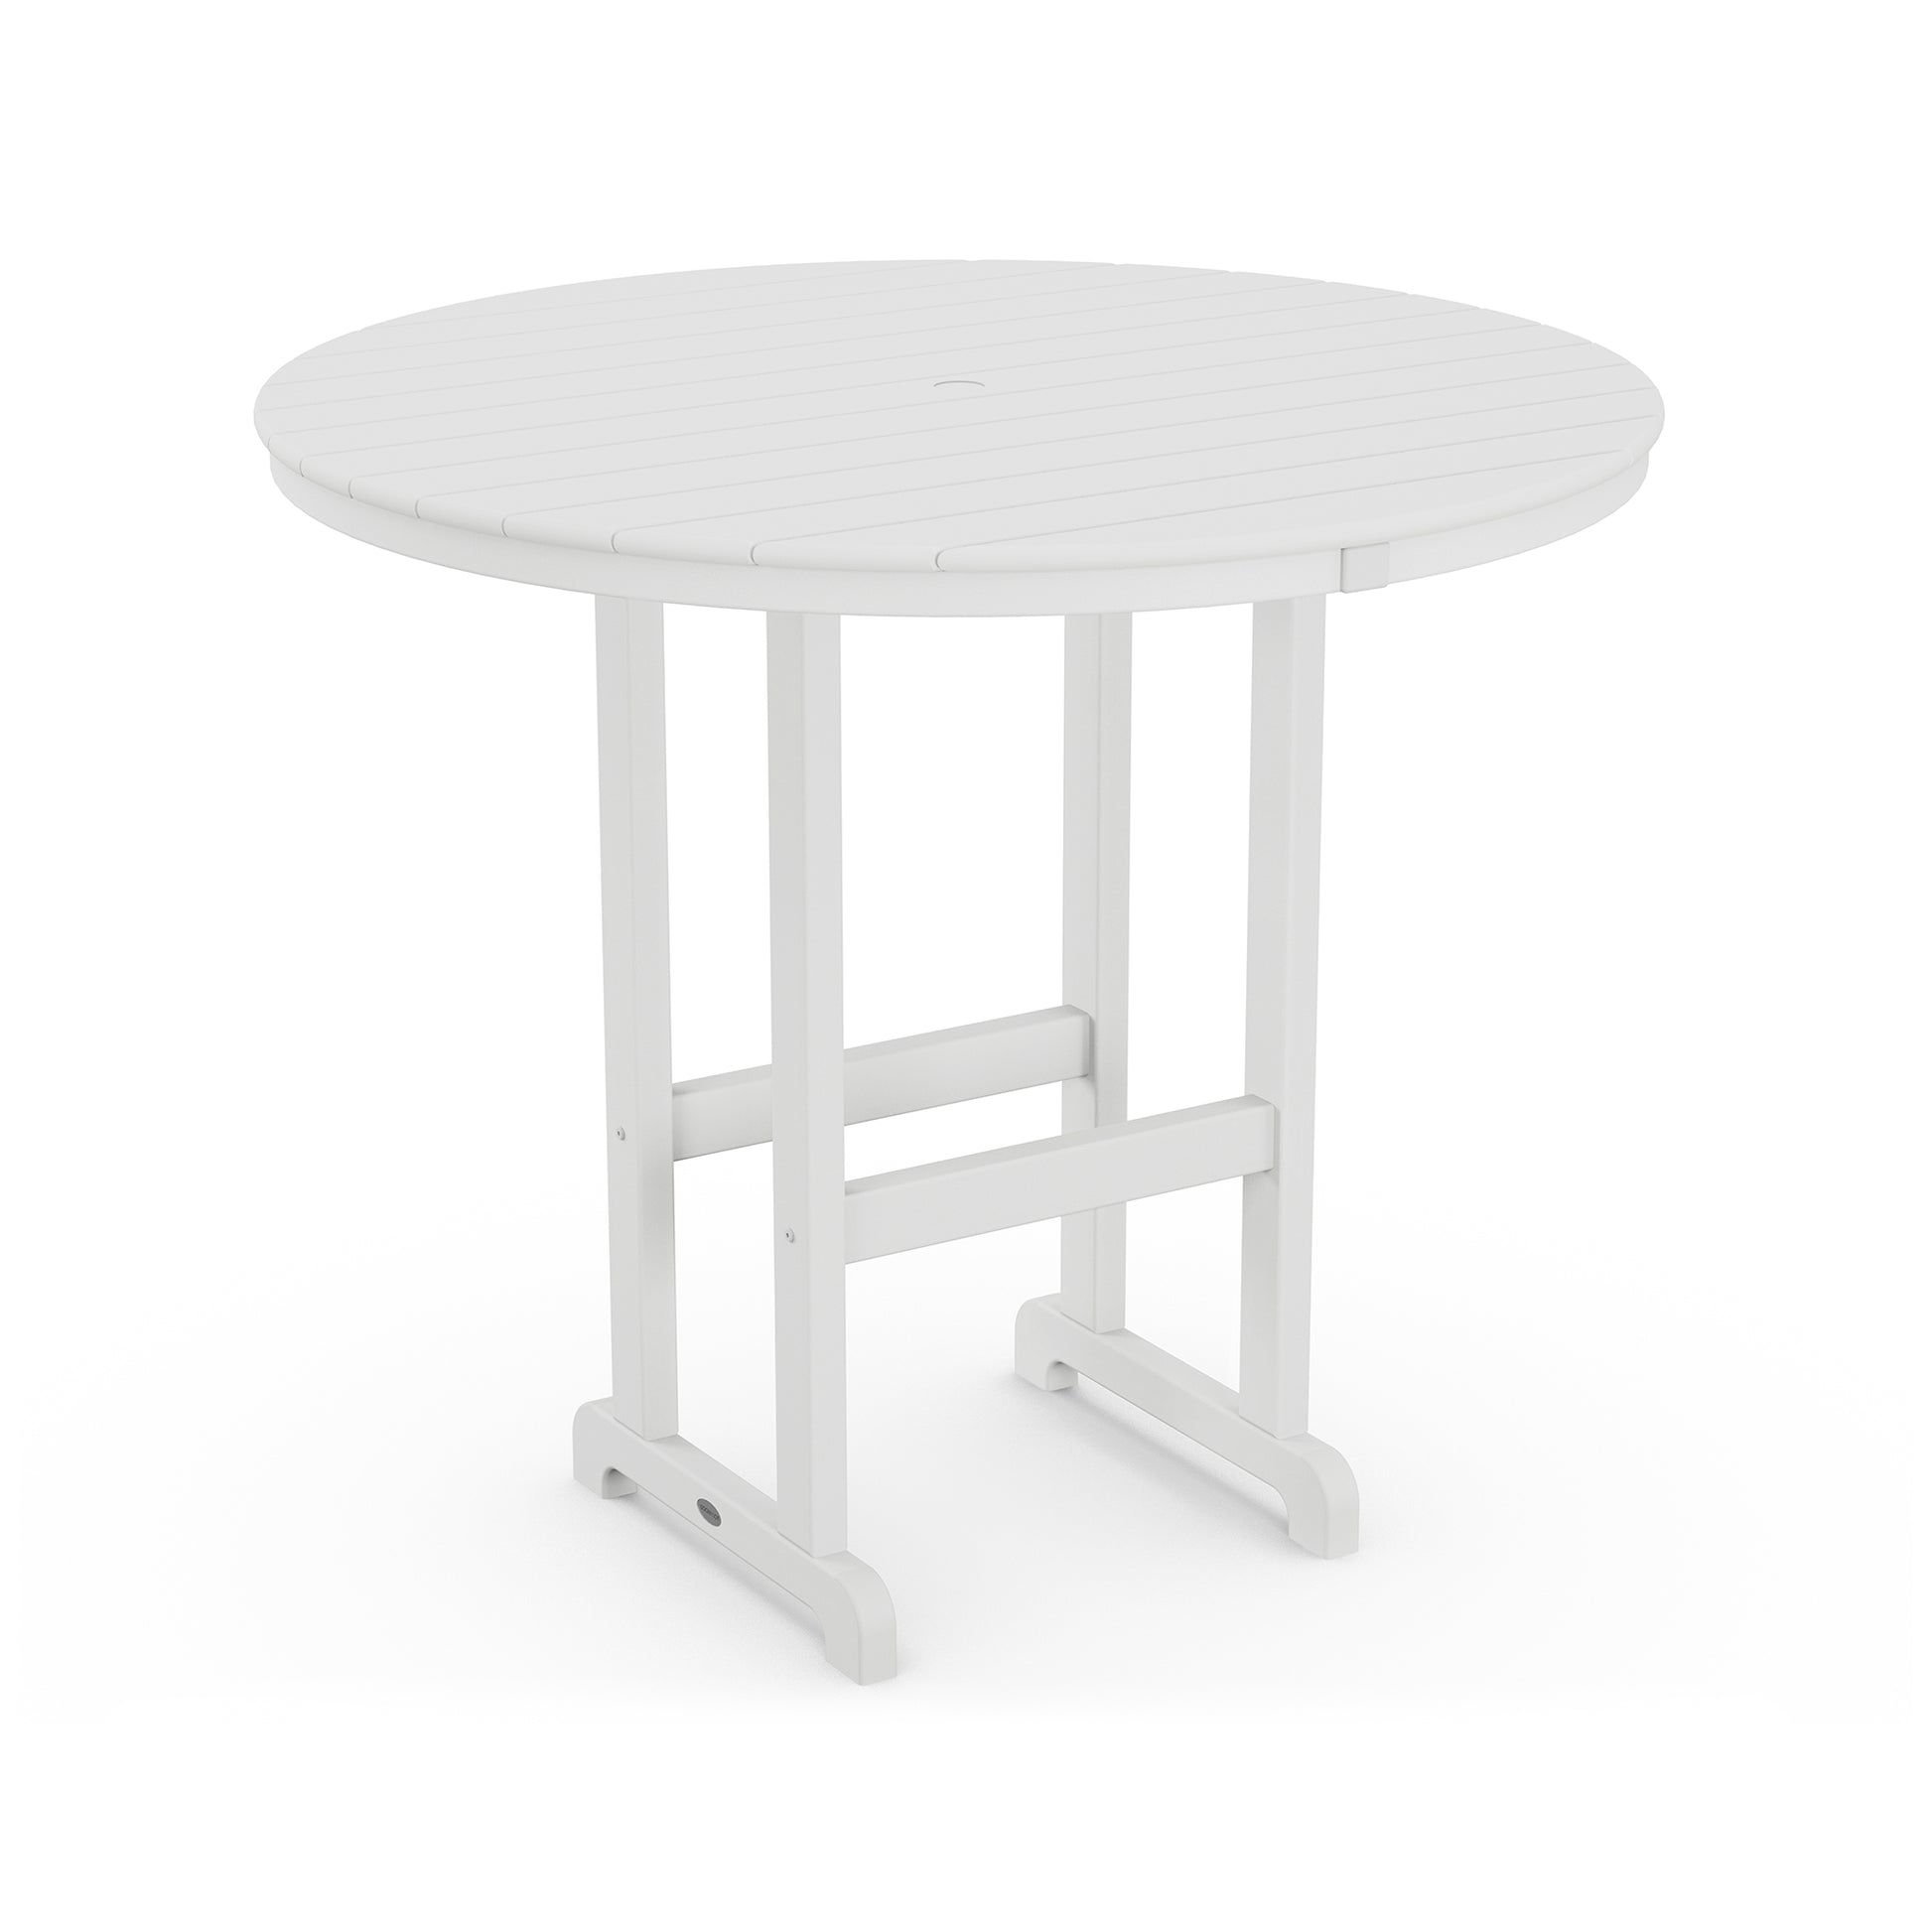 A round, white POLYWOOD® outdoor table on a white backdrop, featuring a simple, clean design with a central pedestal and horizontal base support.